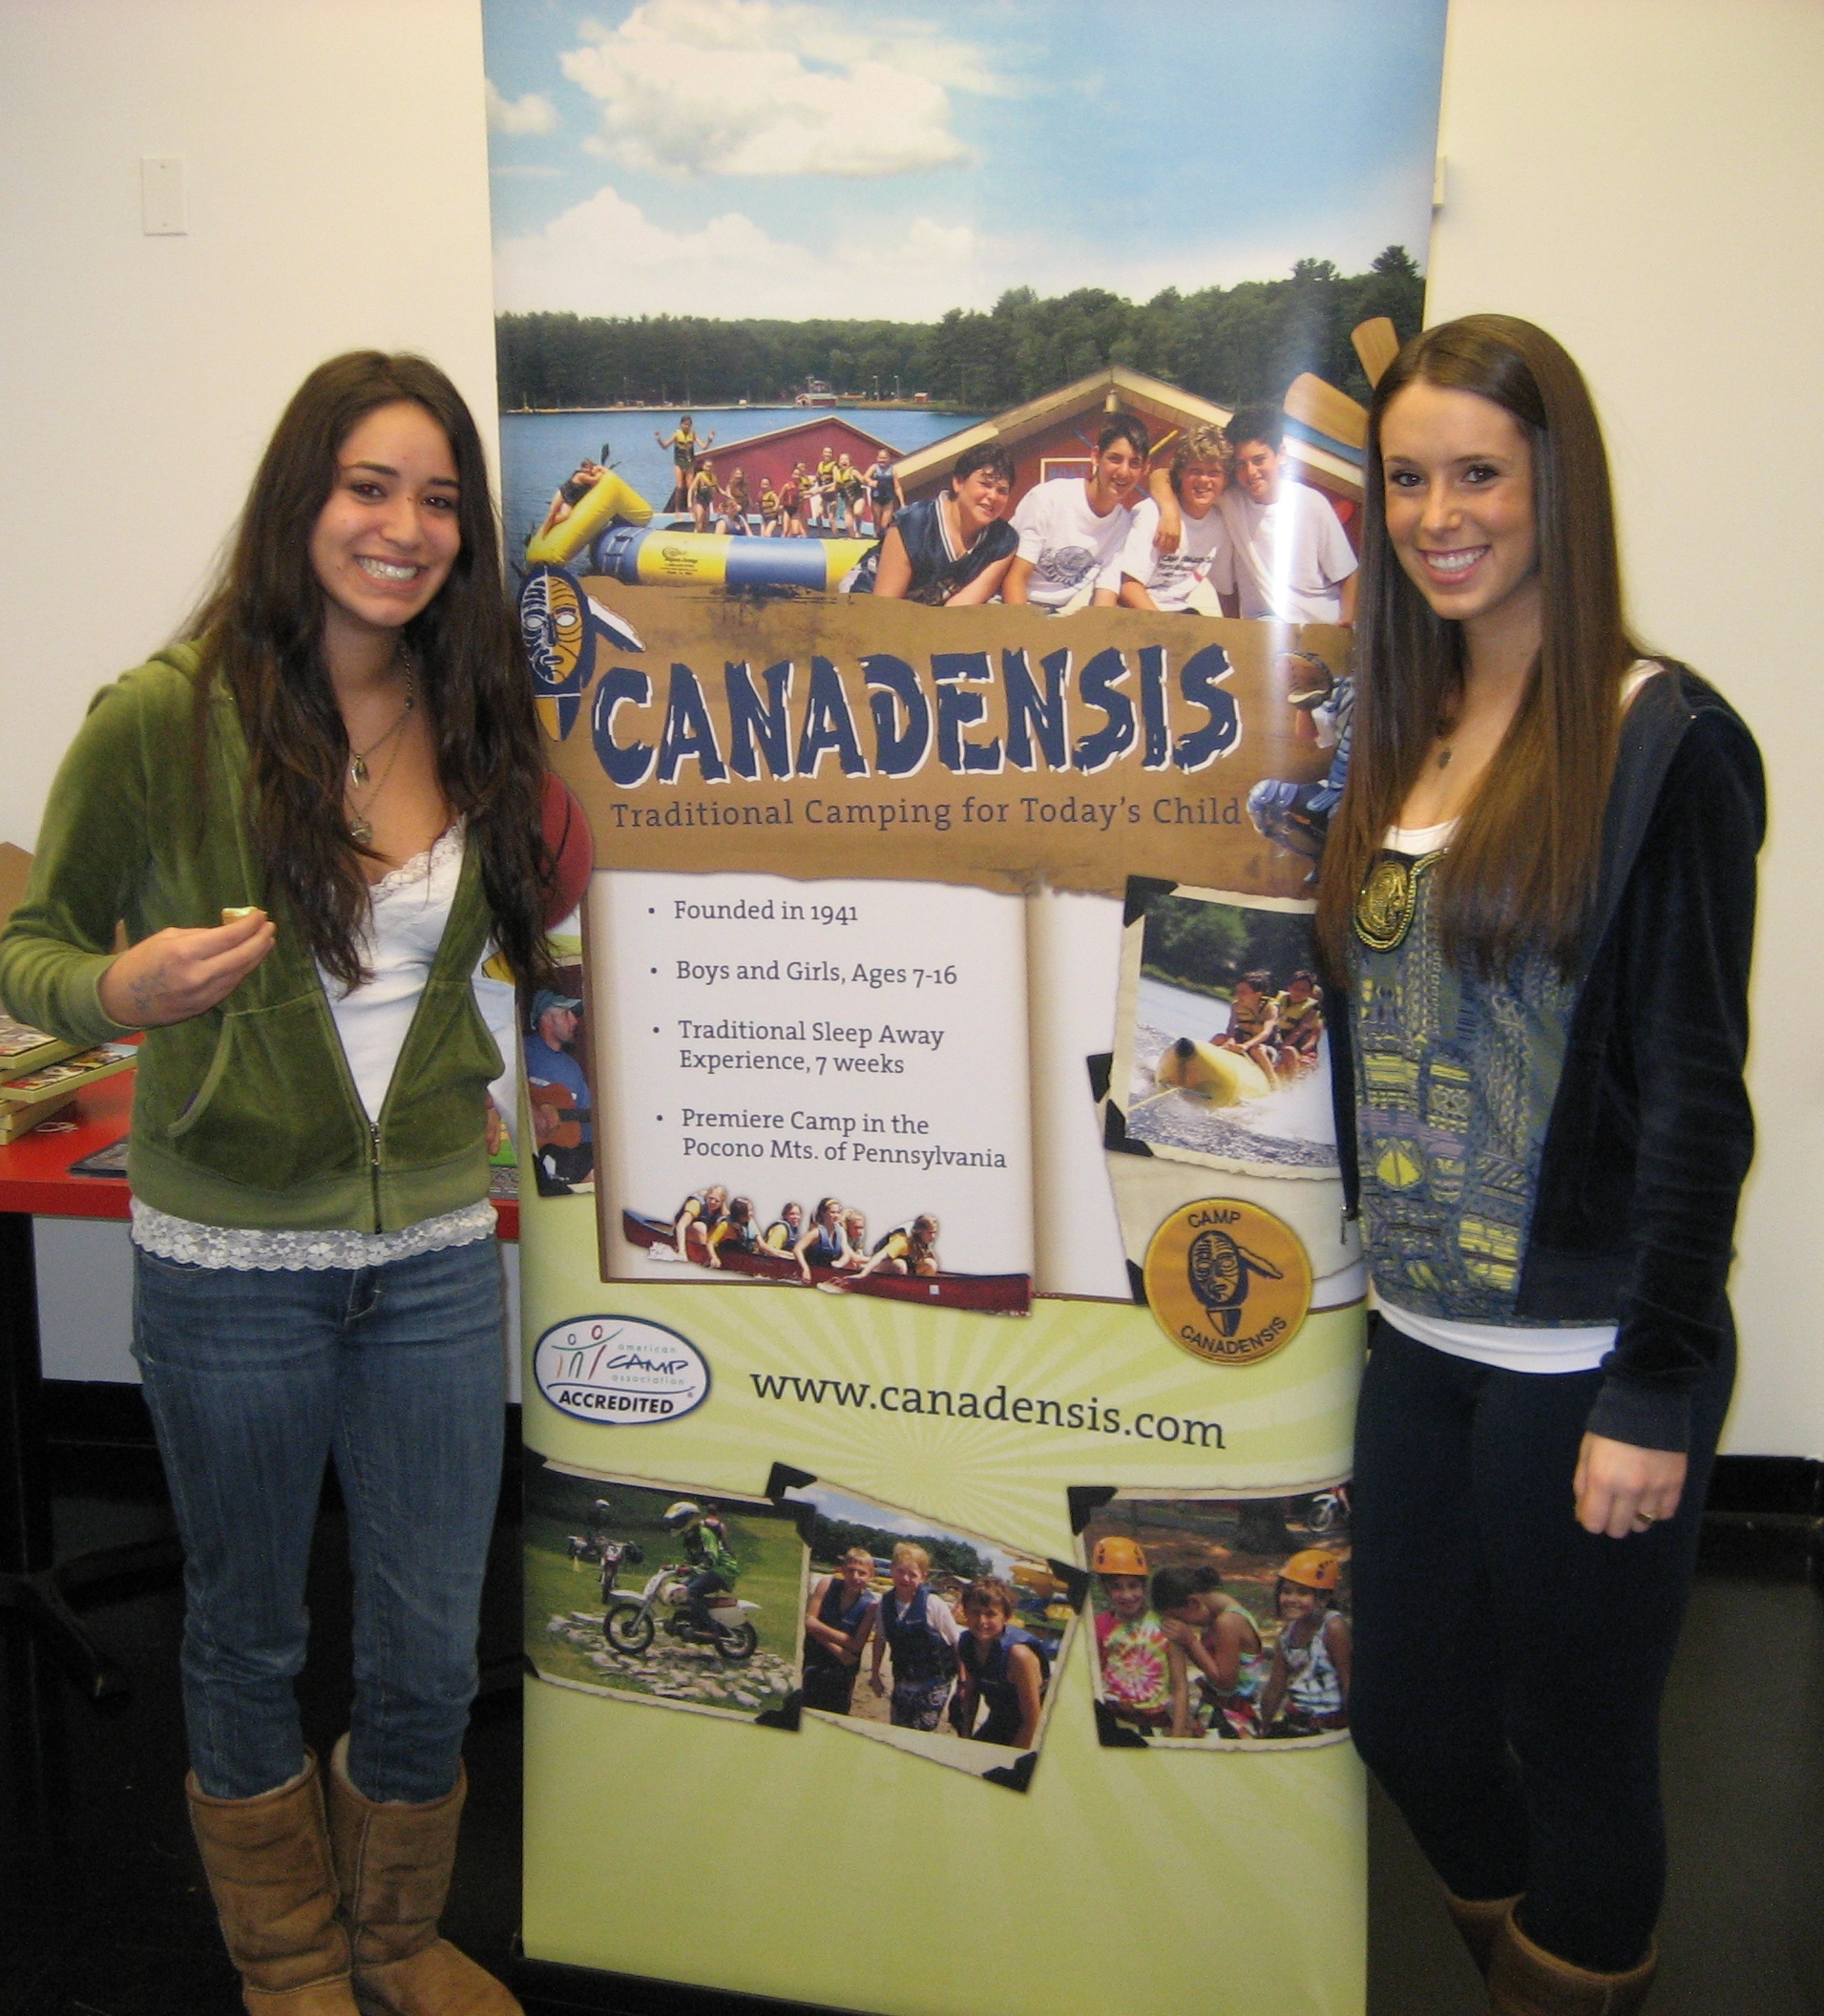 CITs Ally Zeltt and Melissa Liebman can't wait for Summer 2010!  